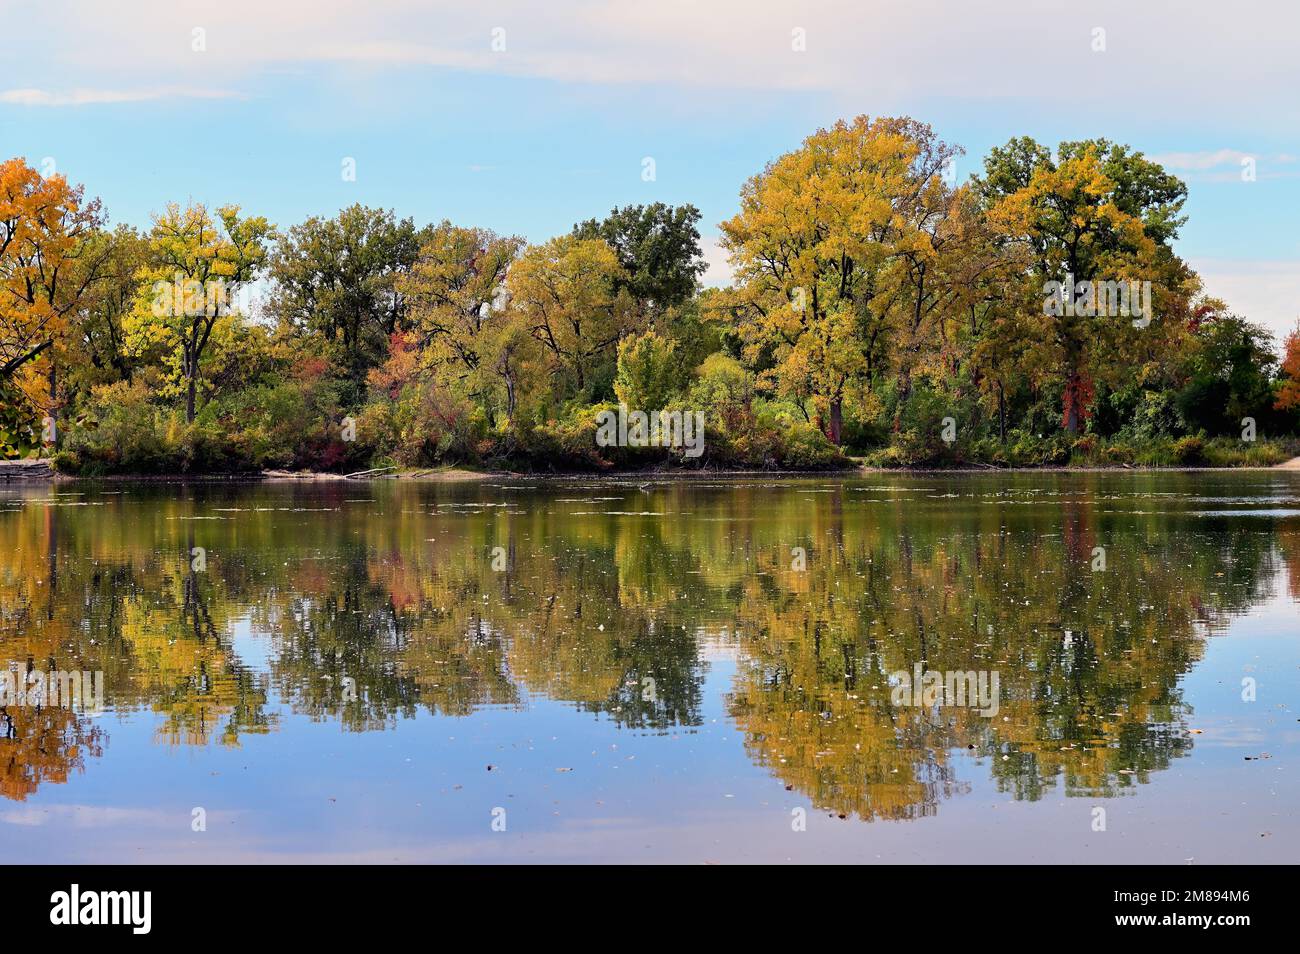 Wayne, Illinois, USA. The beauty of autumn color is just beginning to emerge around a lake at a protected forest preserve in northeastern Illinois. Stock Photo